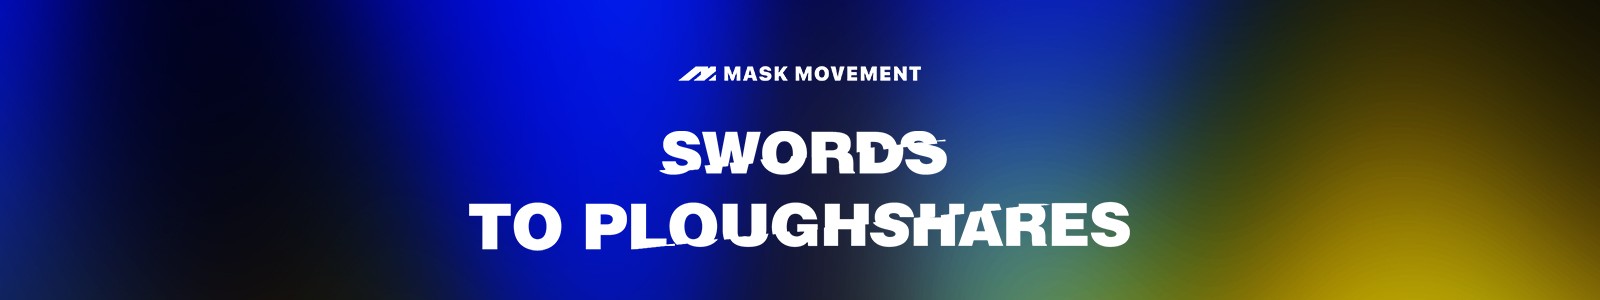 Swords to Ploughshares for Kontakt by Mask Movement